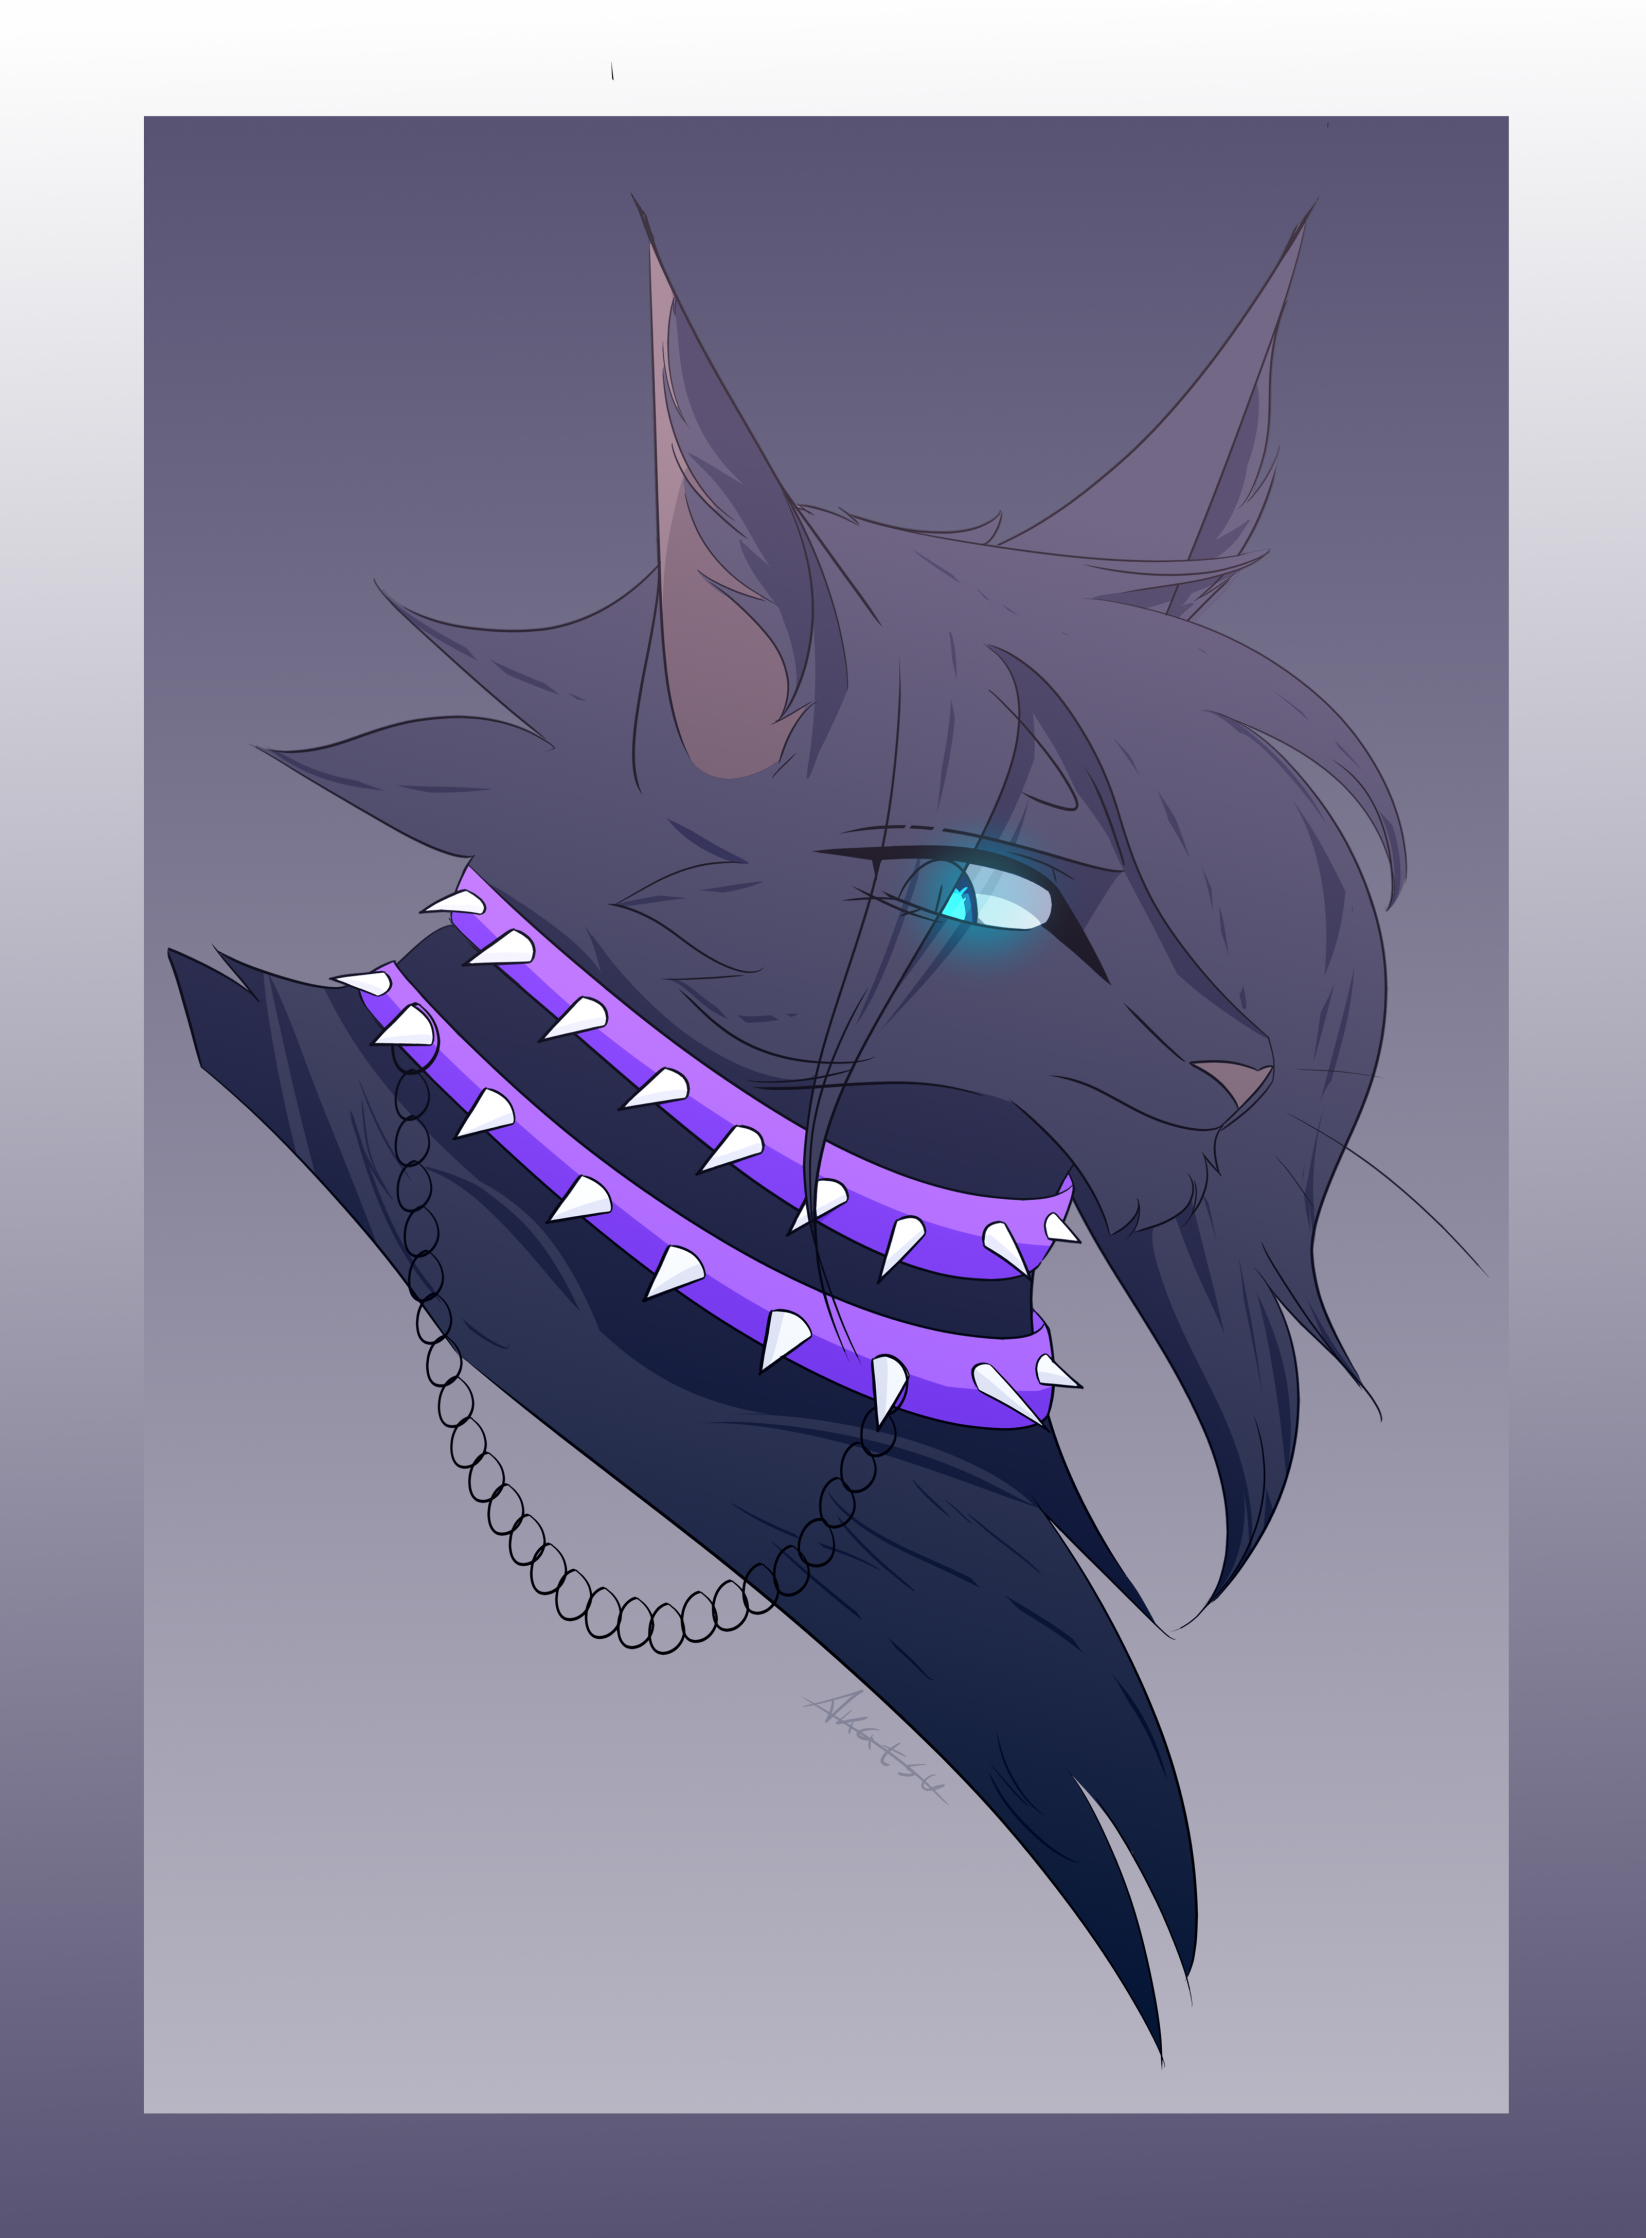 scourge from Warrior Cats